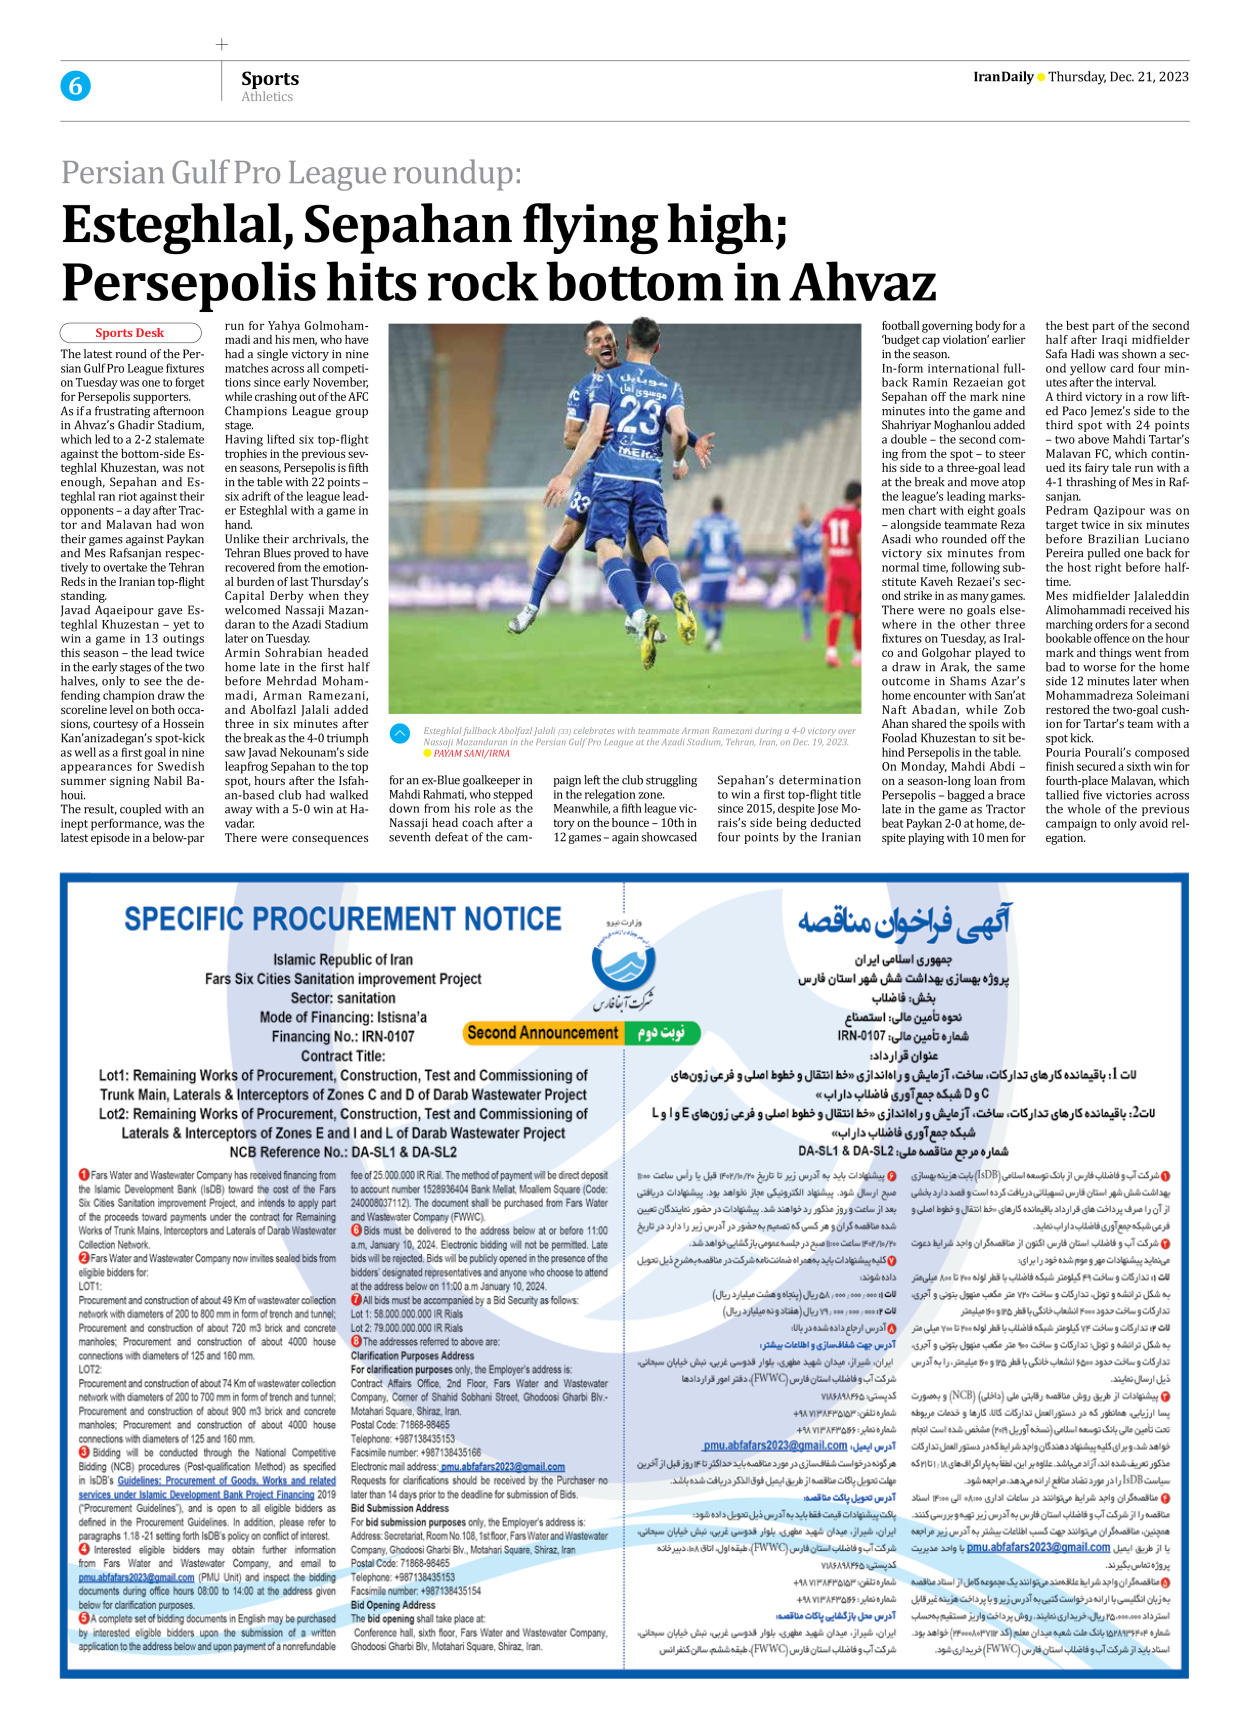 Iran Daily - Number Seven Thousand Four Hundred and Sixty Four - 21 December 2023 - Page 6